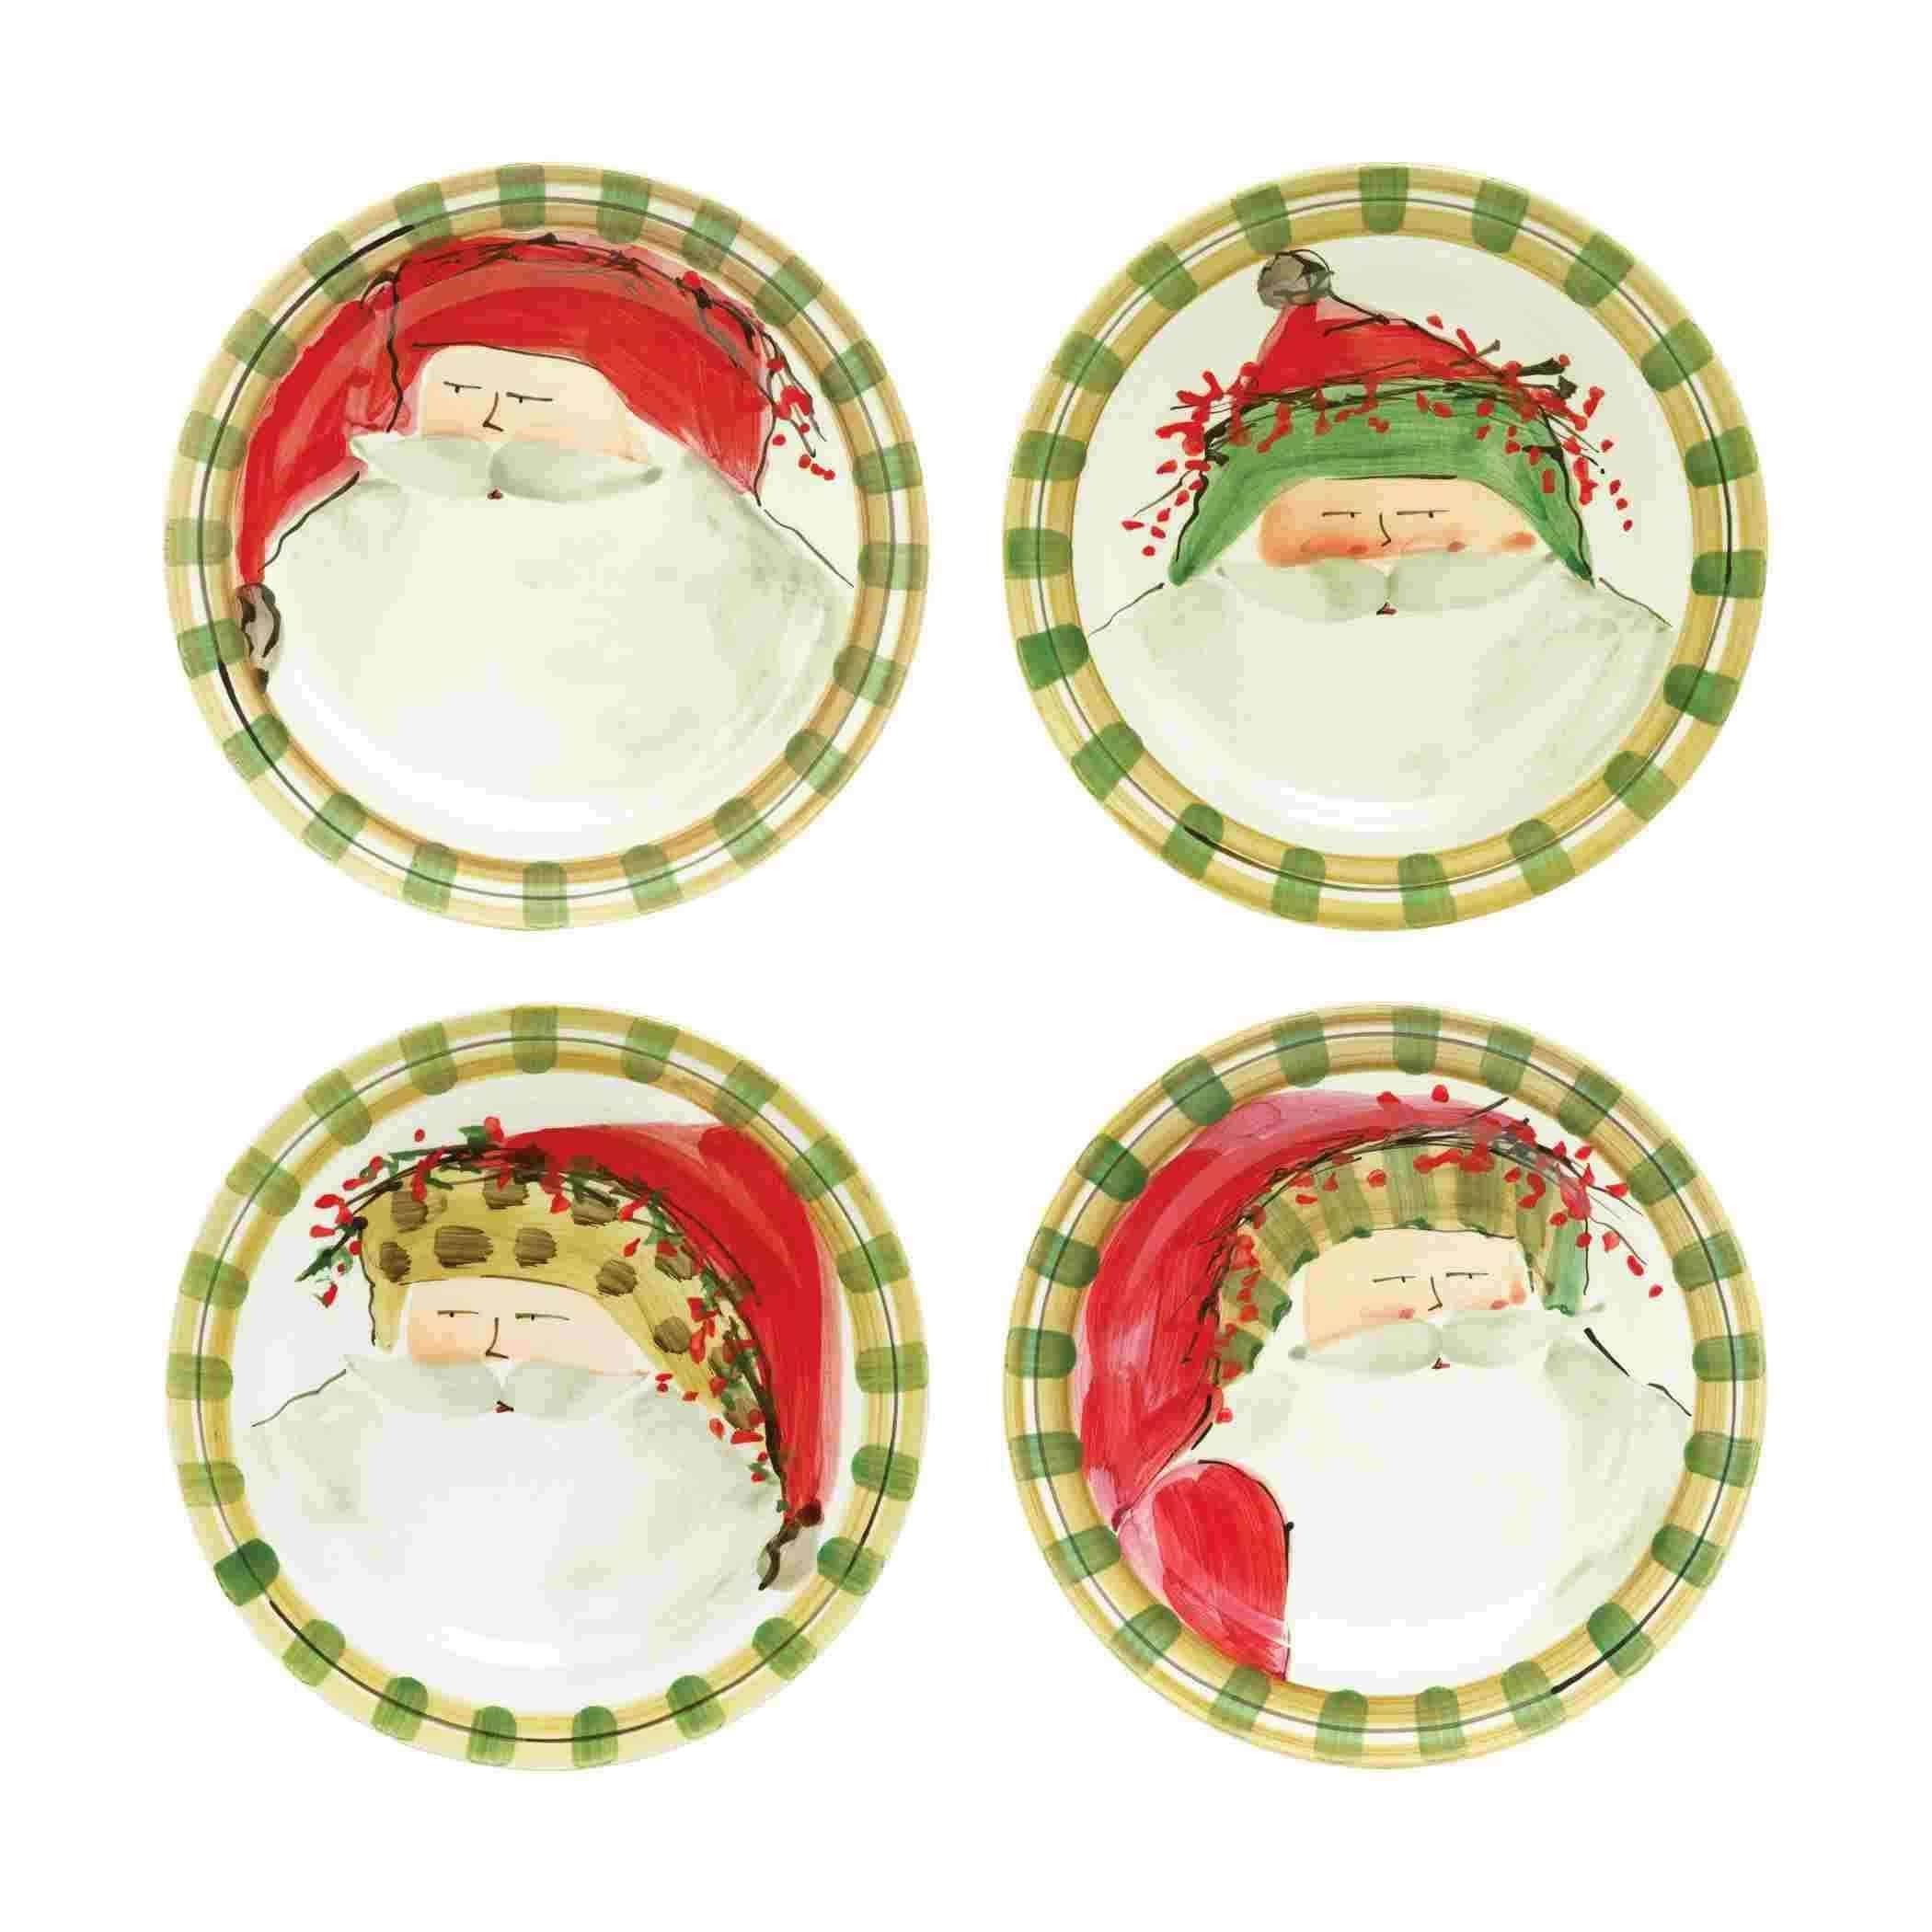 Old St. Nick Assorted Round Salad Plates - Set of 4